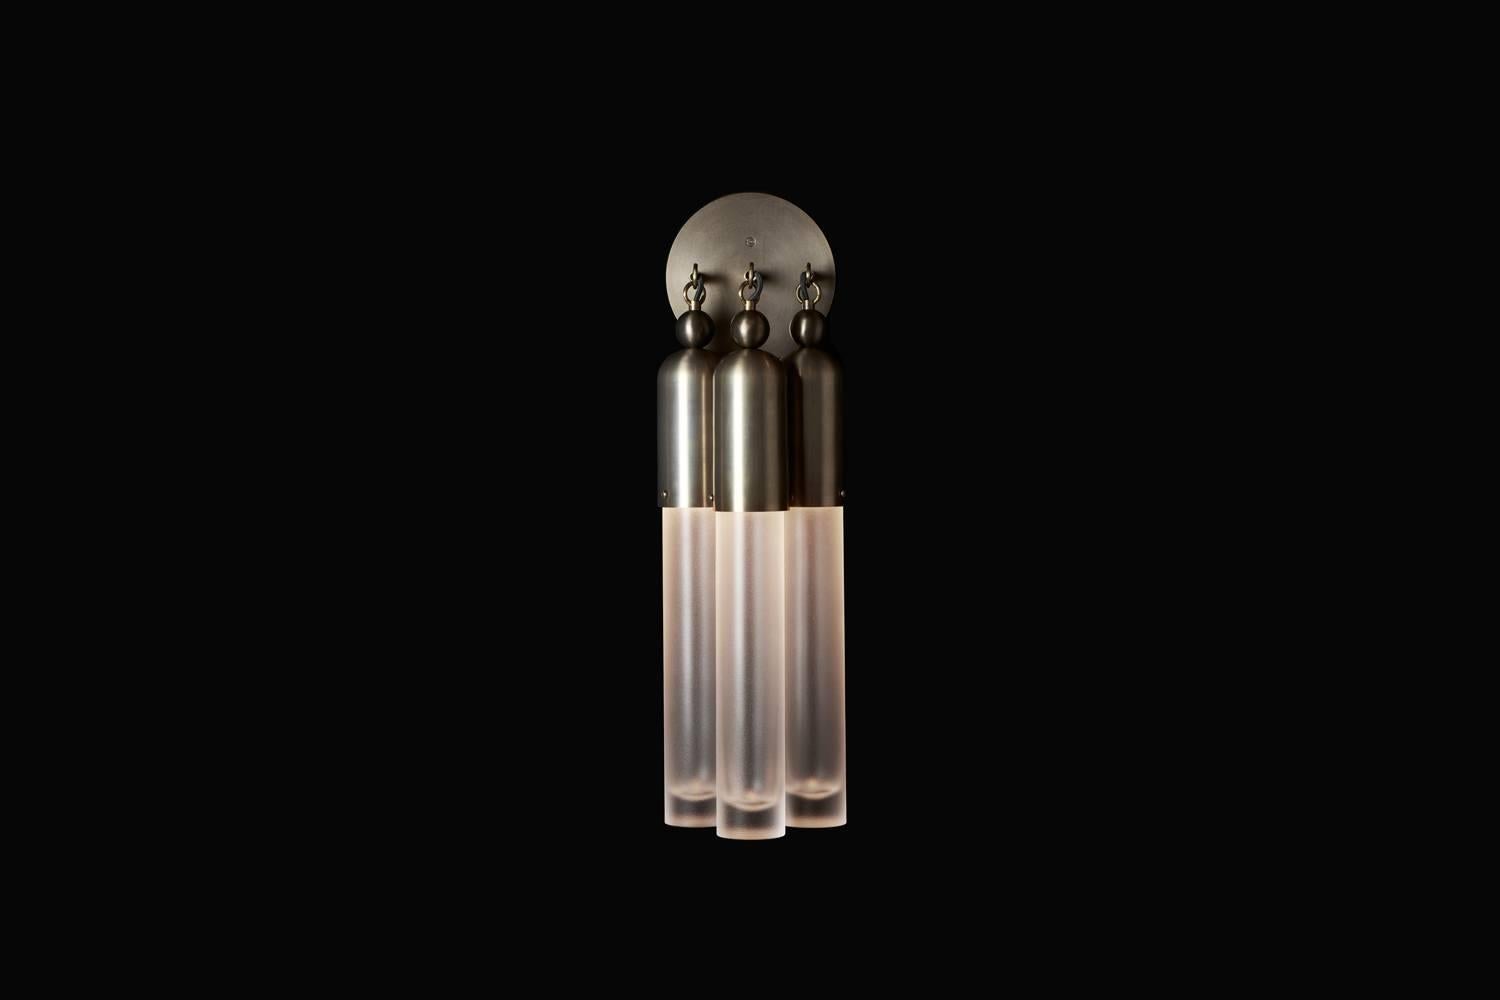 The Tassel series condenses the warmth and decadence of a traditional chandelier to a concise, modern conclusion. Emanating from a brass dome, the light is amplified as it refracts through mold-blown glass cylinders.

The Tassel 3 sconce uses a